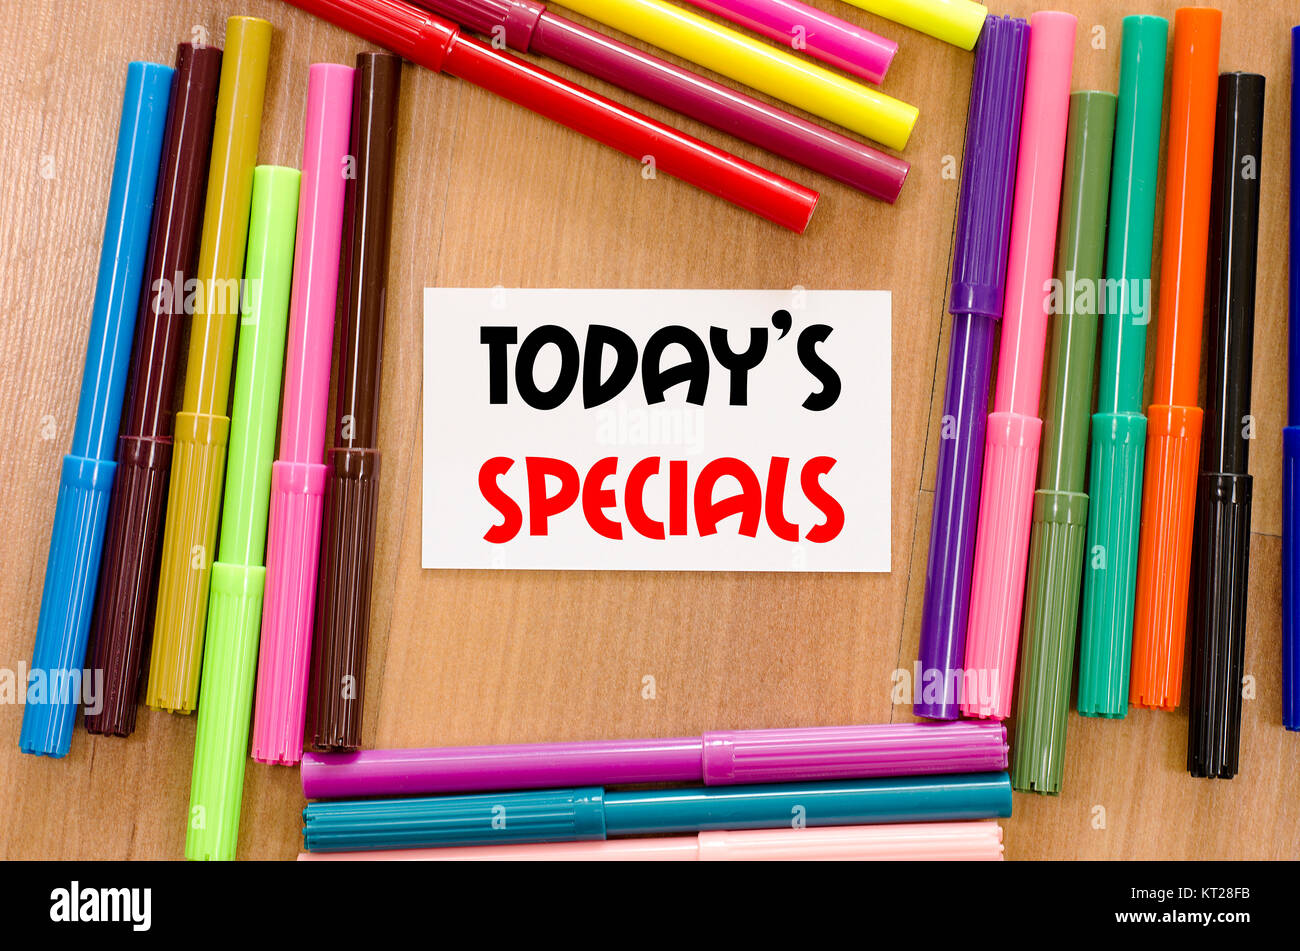 Today's specials text concept Stock Photo